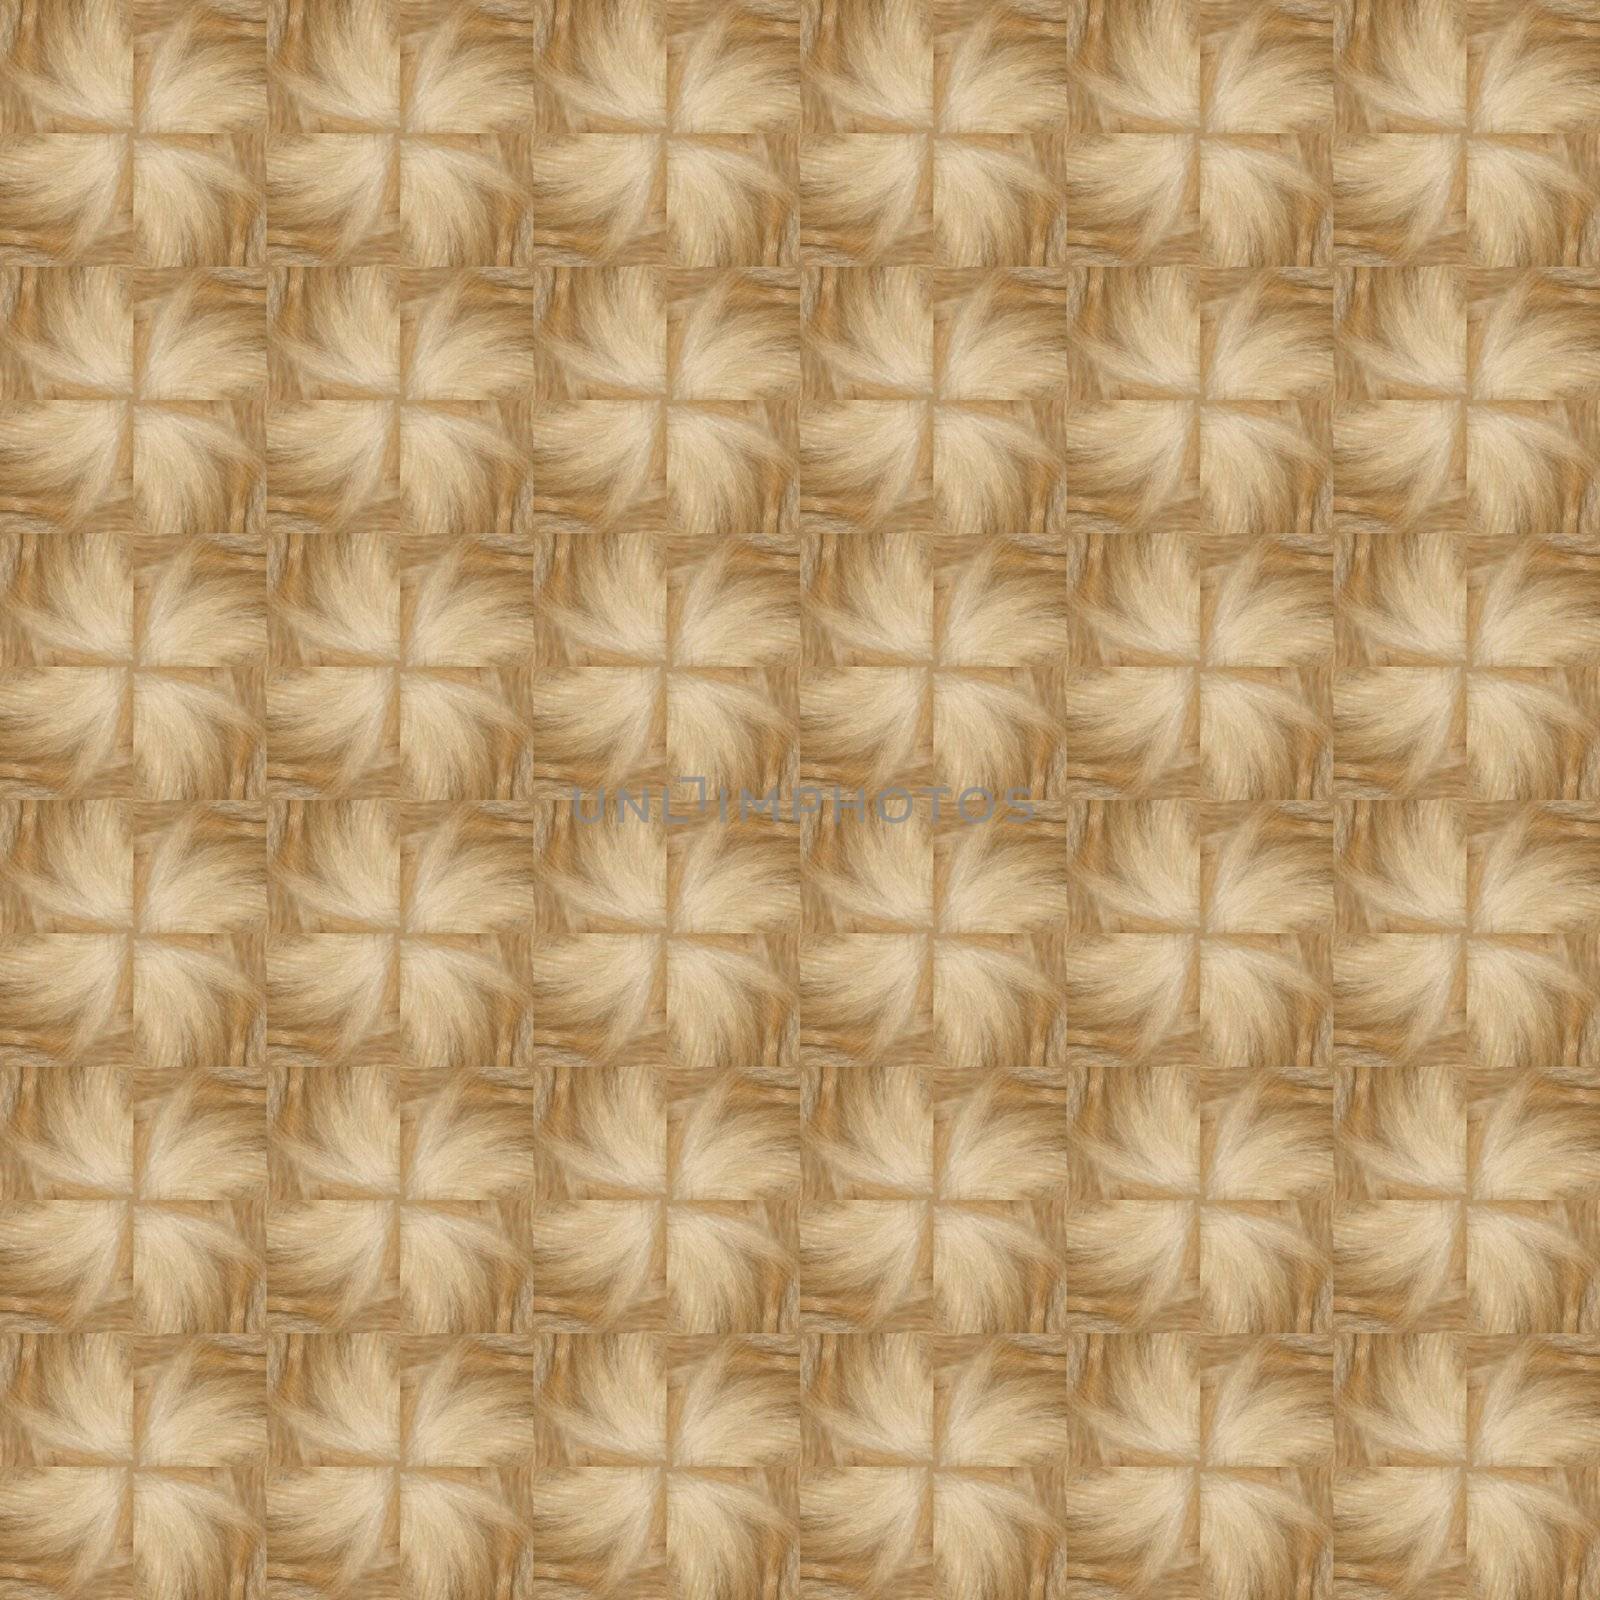 Seamless tileable background. Big beige fur flowers retro texture with an old-fashioned twist